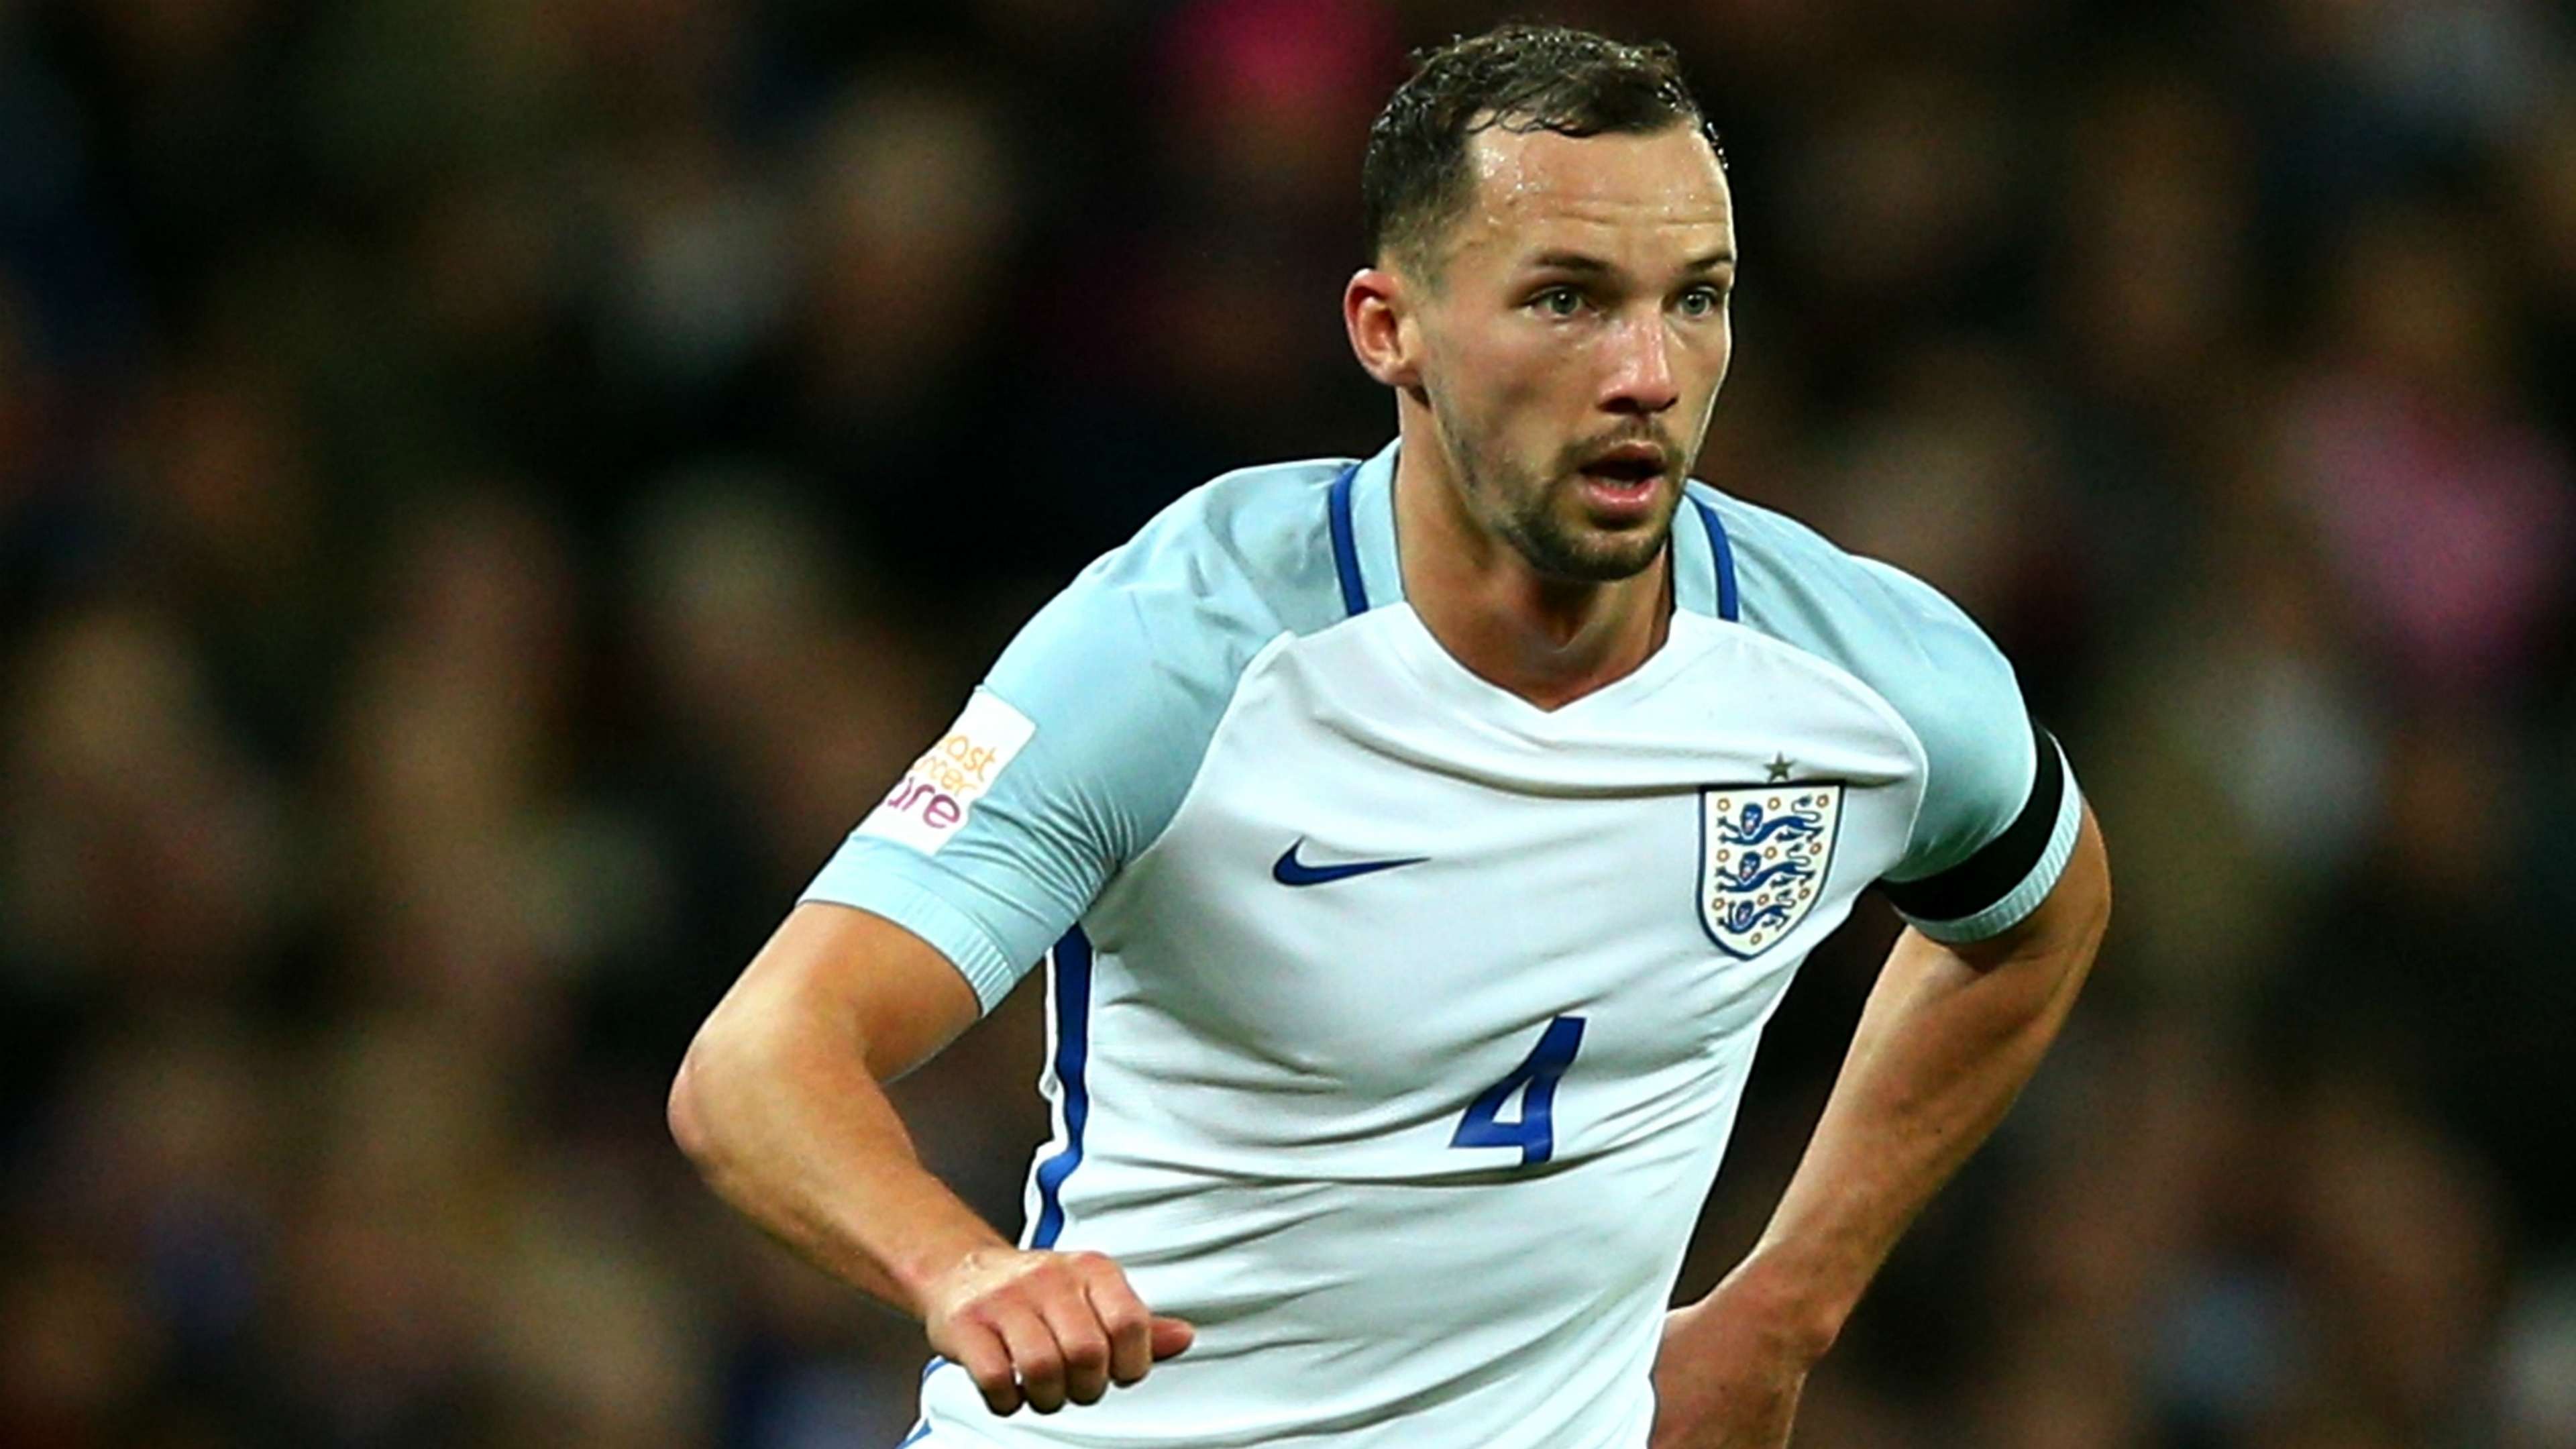 England's Euro 2016 squad | Danny Drinkwater